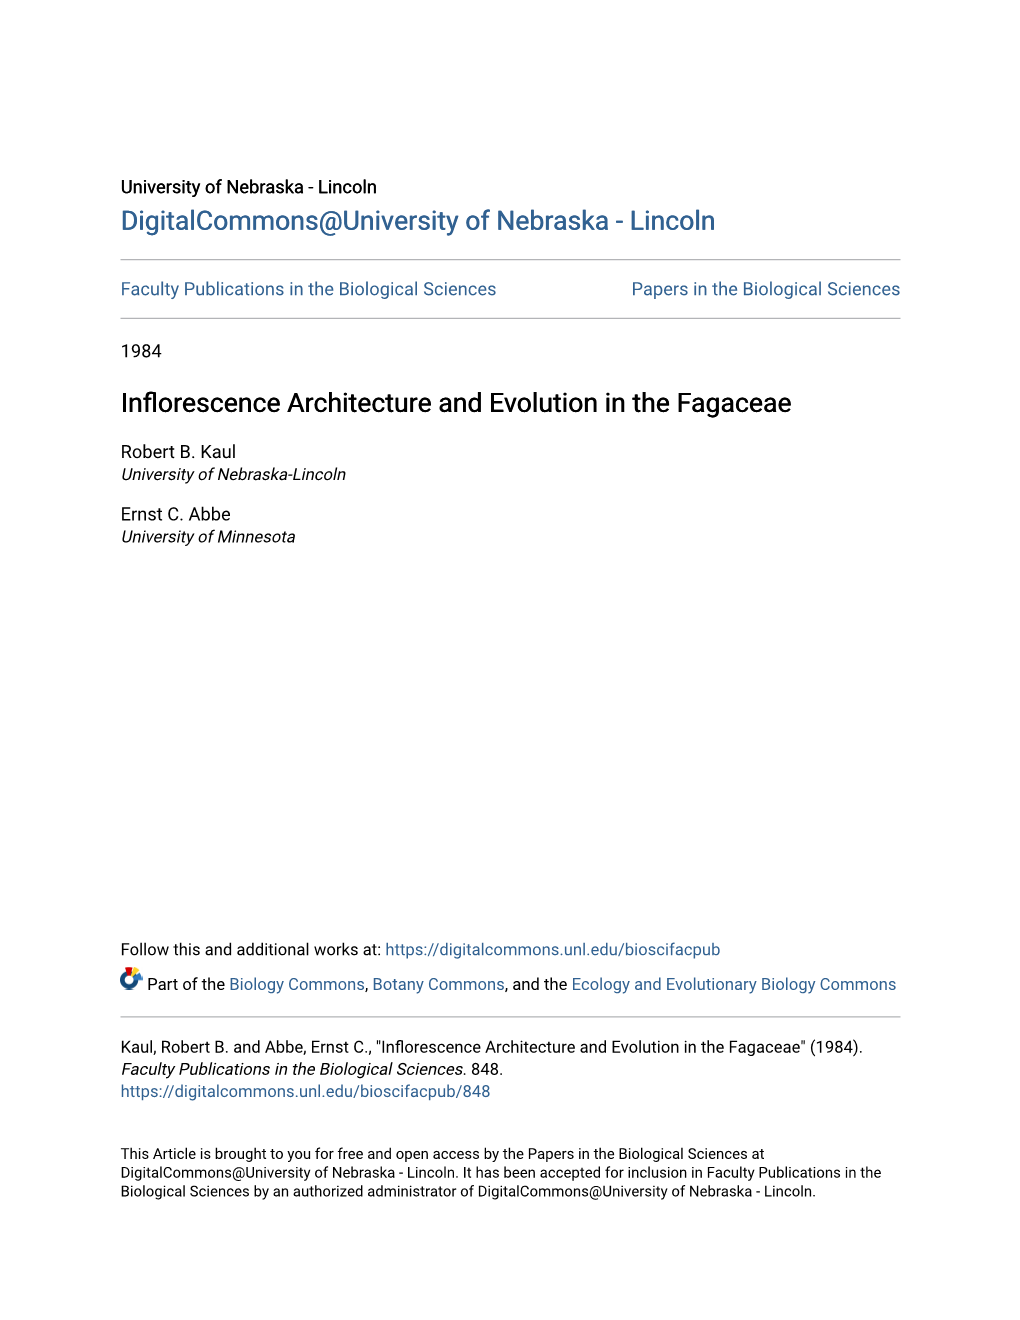 Inflorescence Architecture and Evolution in the Fagaceae